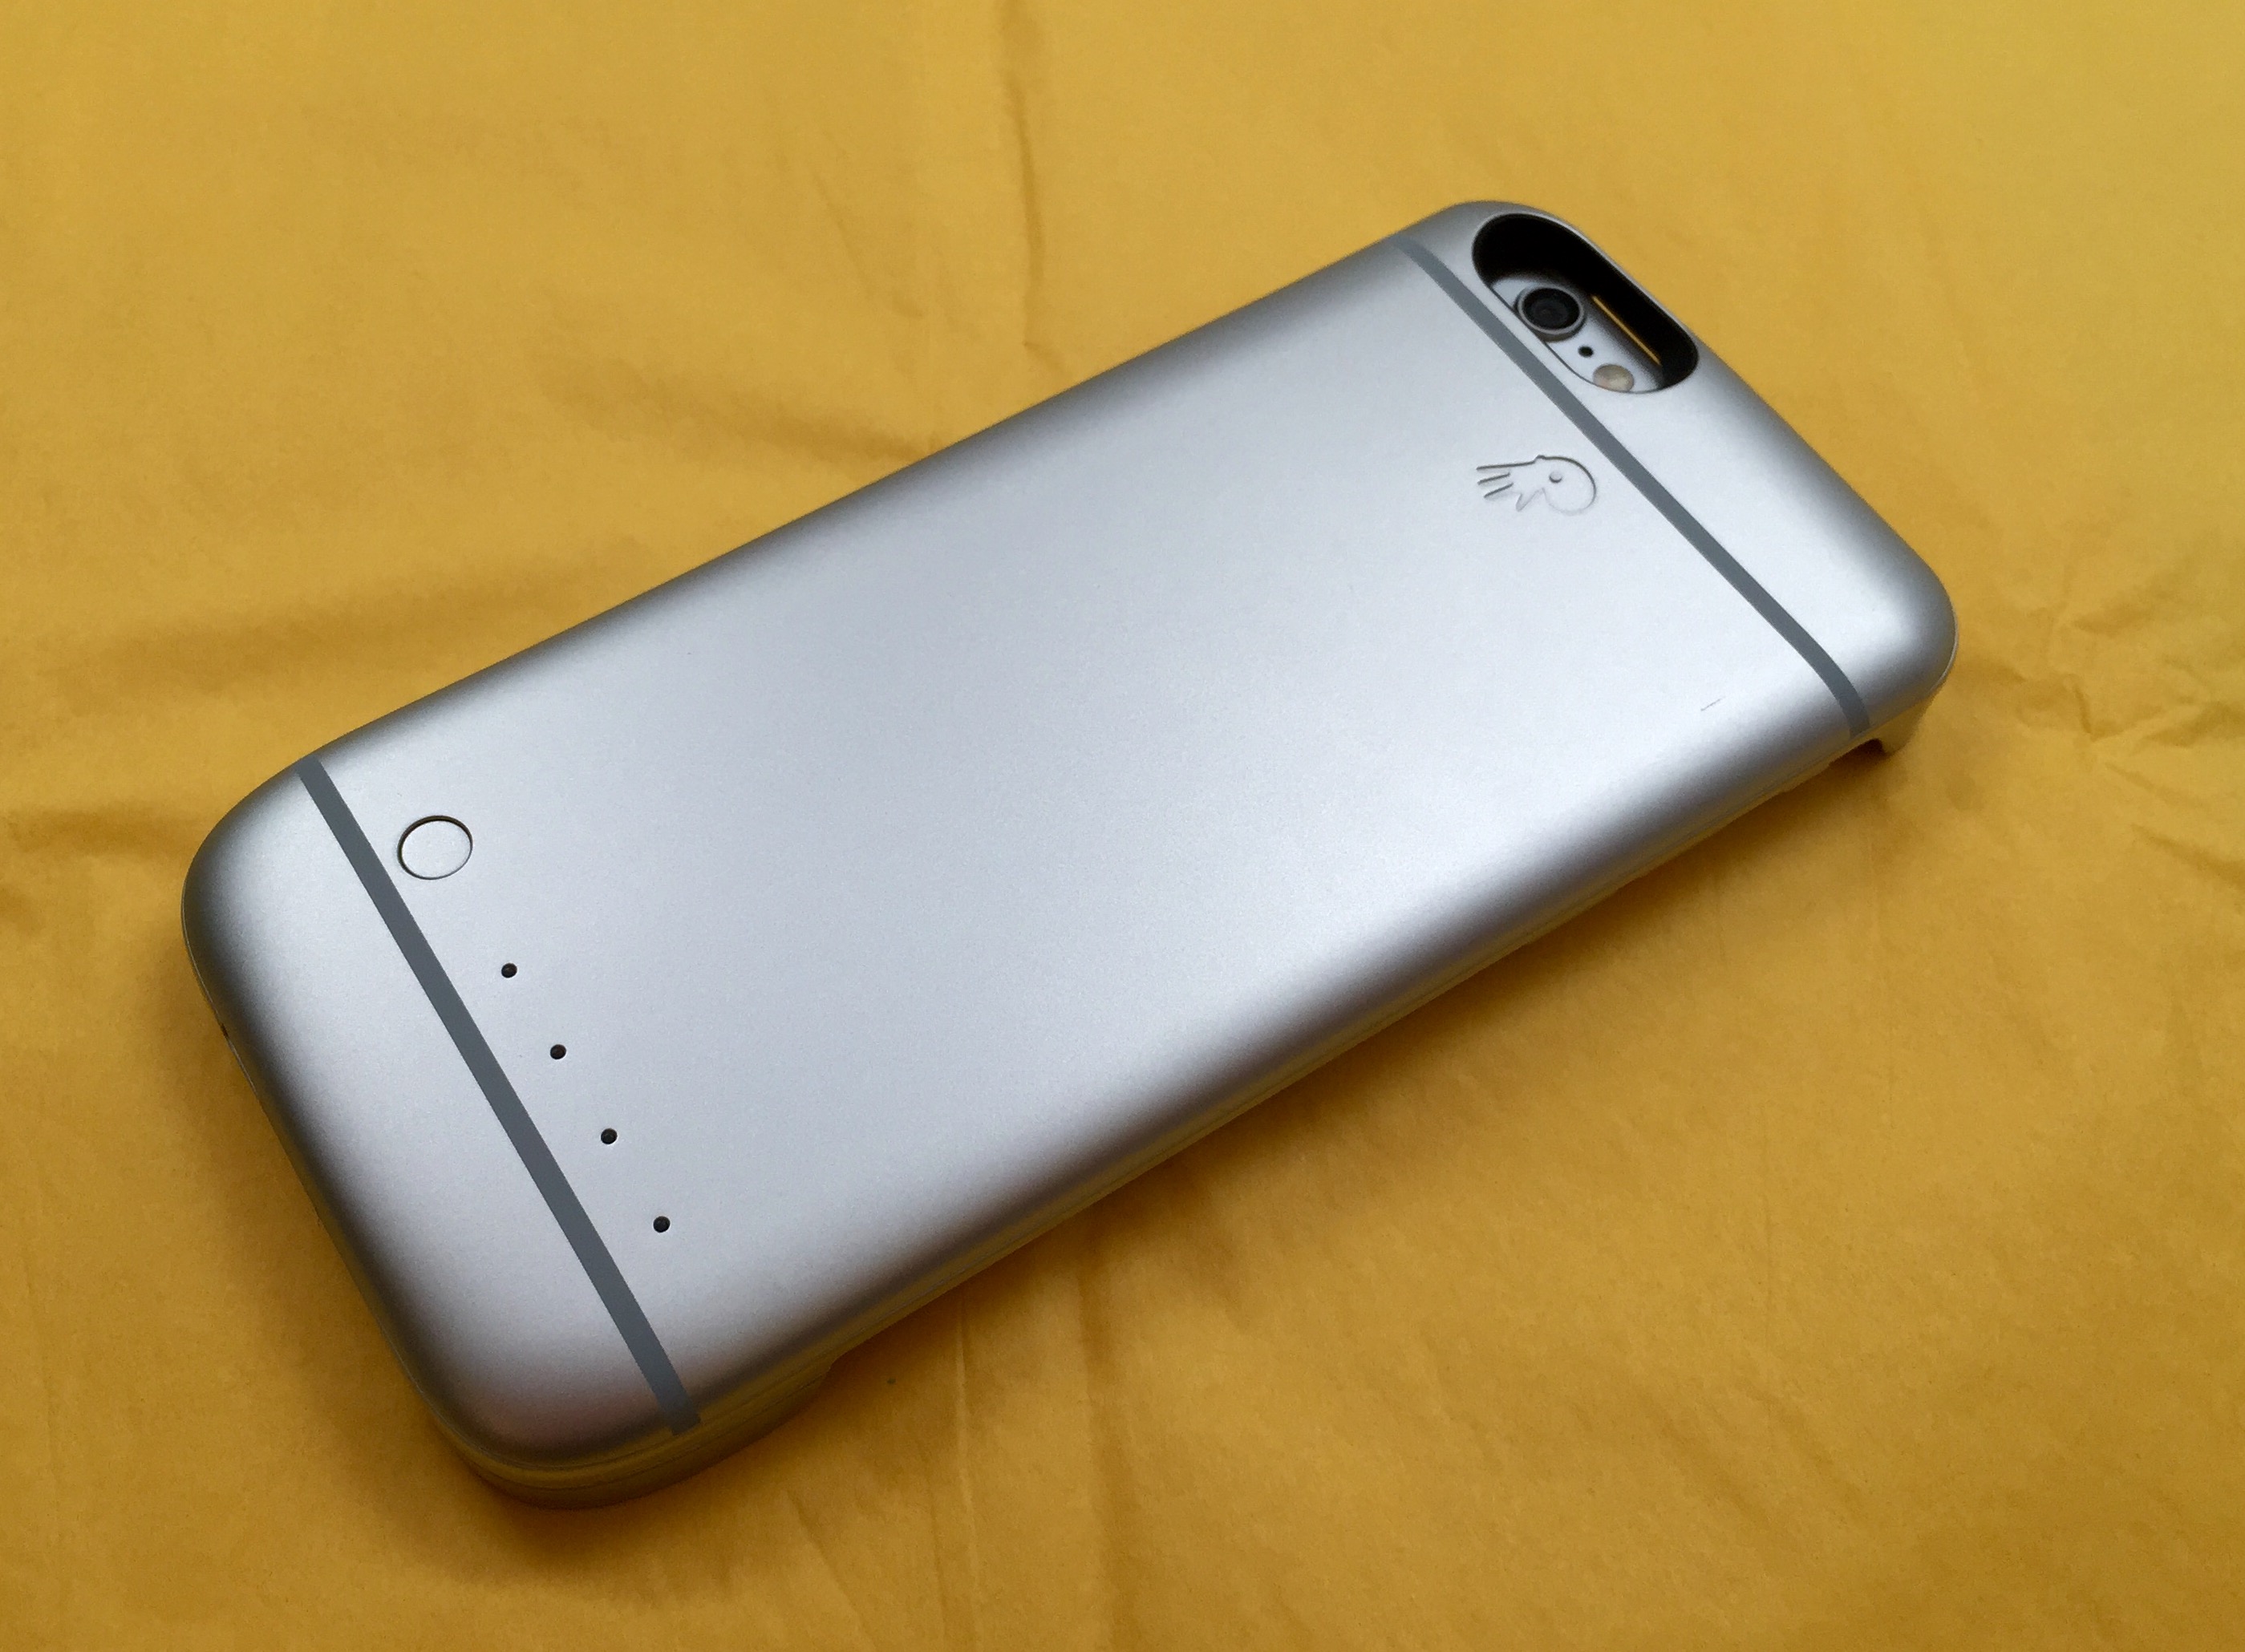 The iPhone 6 PowerSkin Spare is a budget iPhone 6 battery case.